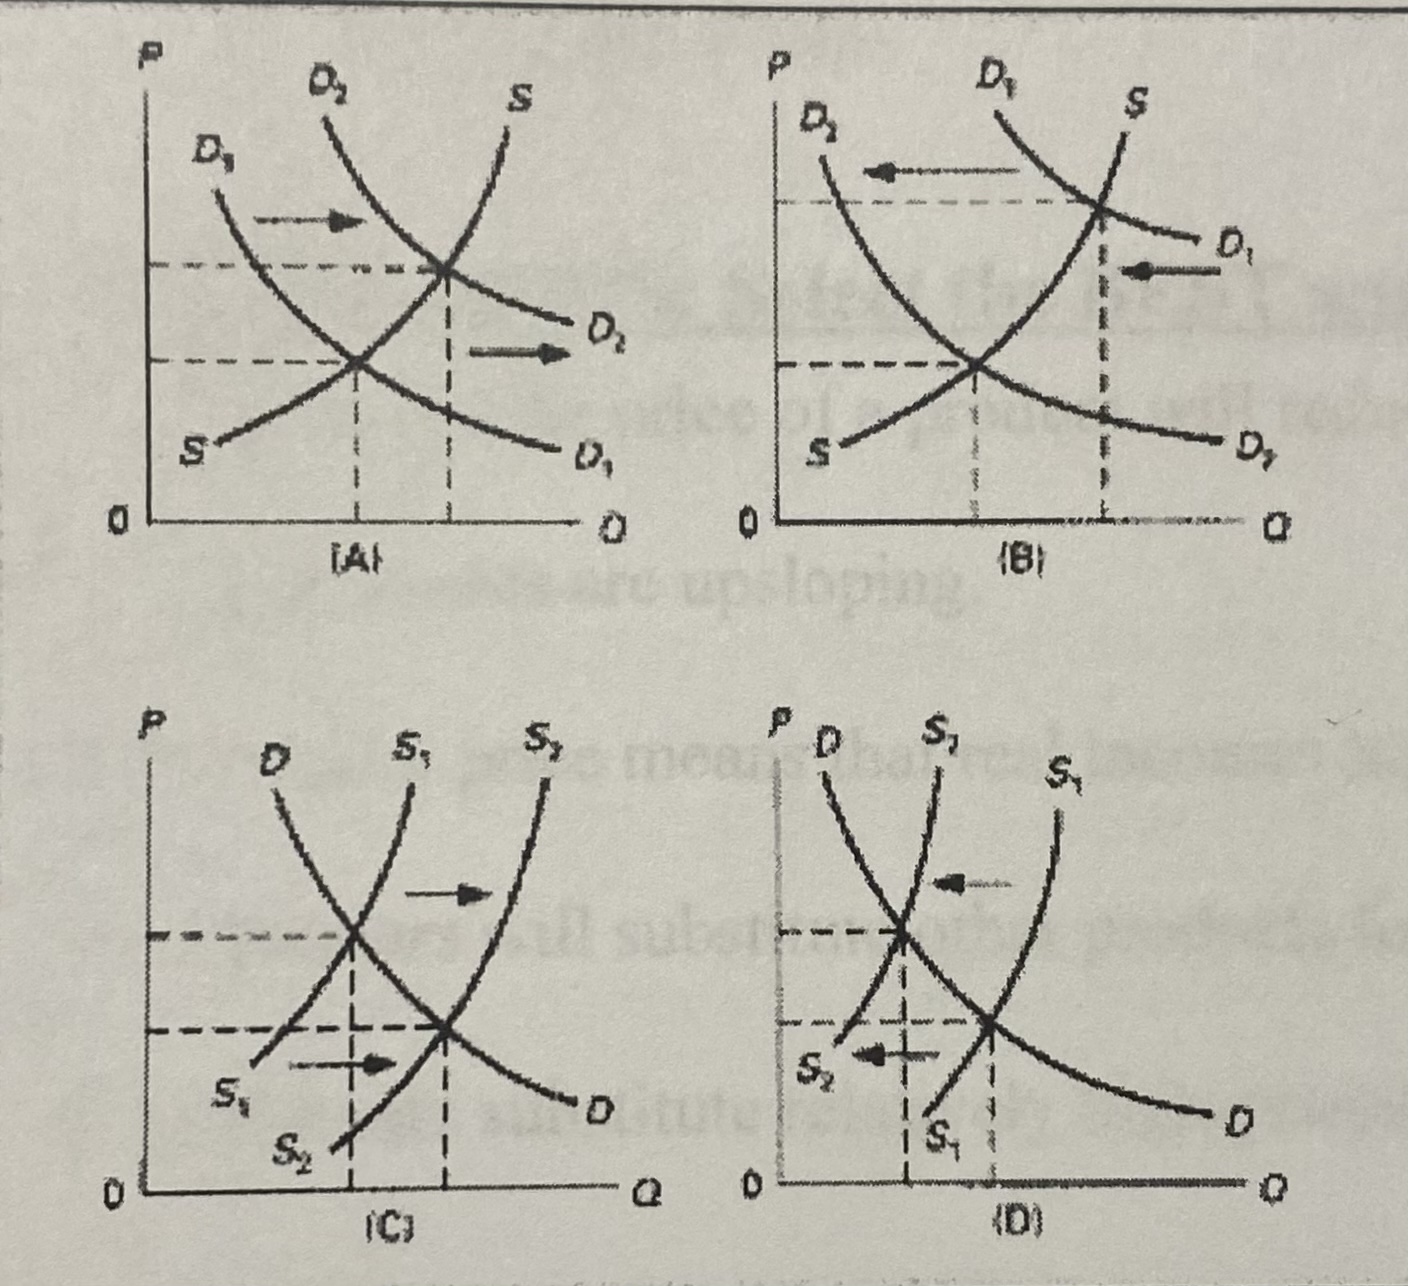 <ol start="9"><li><p>Which of the above diagrams illustrates the effect of a governmental subsidy on the market for AIDS research</p></li></ol>